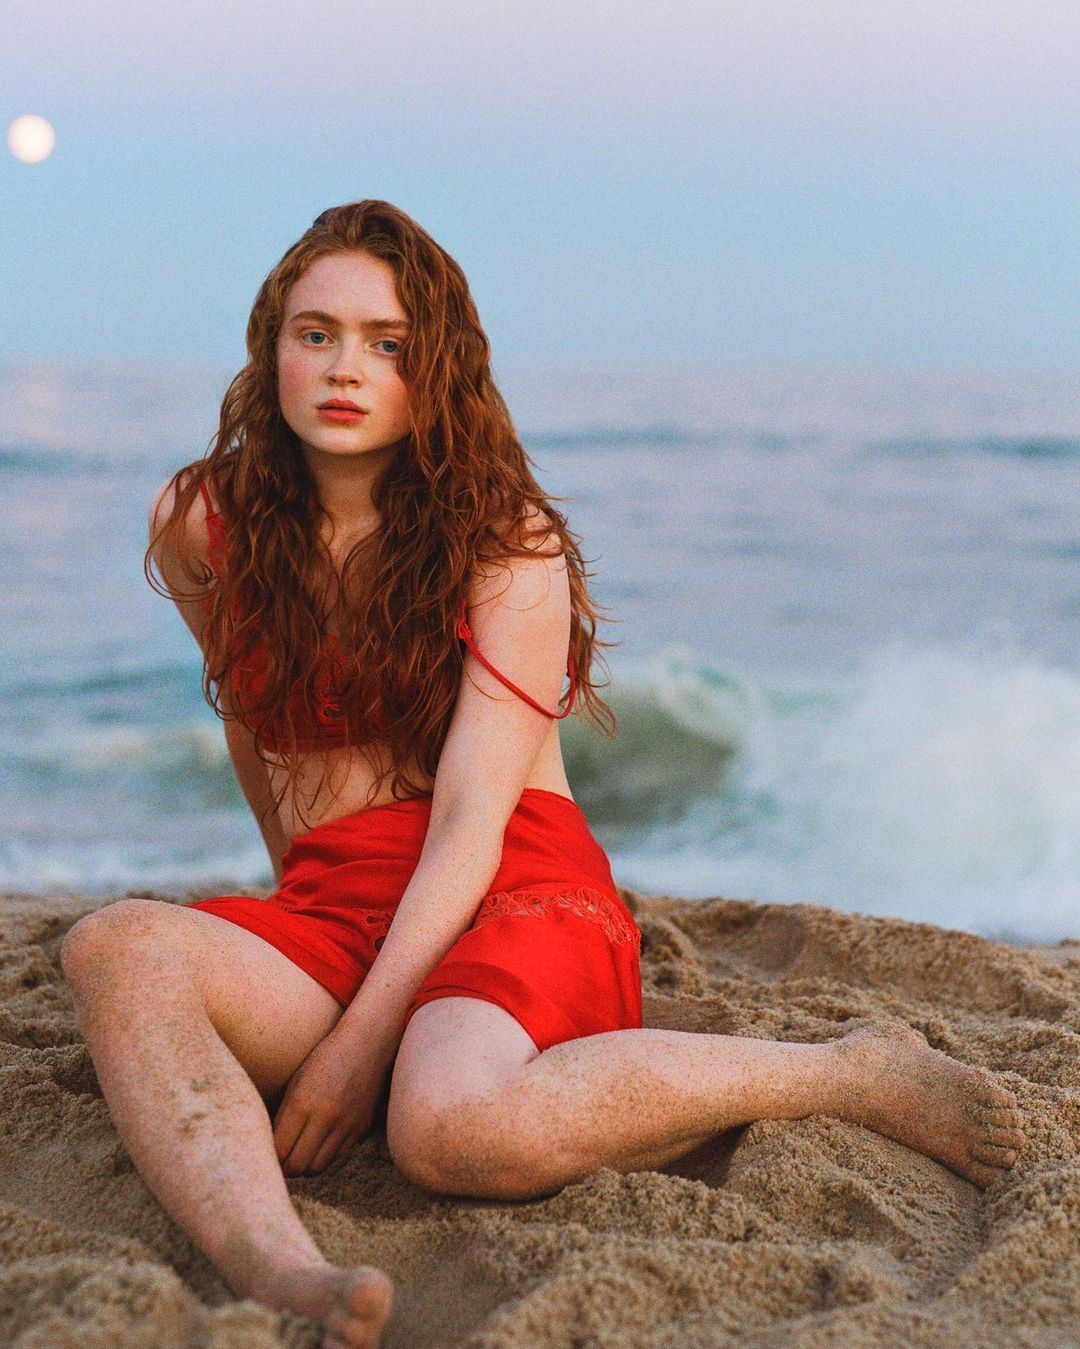 A real goddess in red  p.s- i miss actress sadie sink, i hope we can see her soon ????.jpg